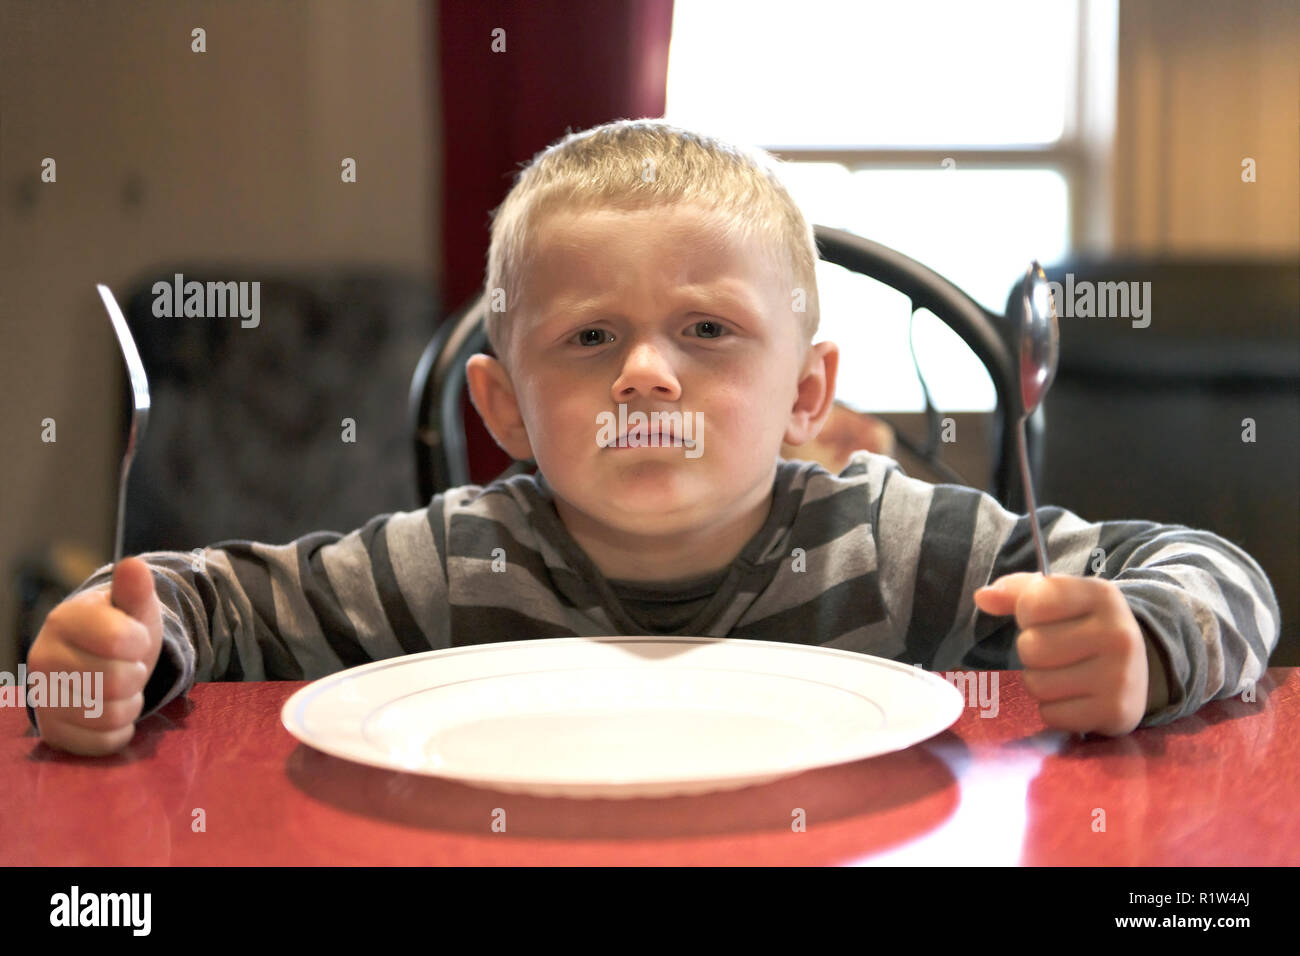 Upset little boy waiting for dinner while holding a fork and a spoon Stock Photo